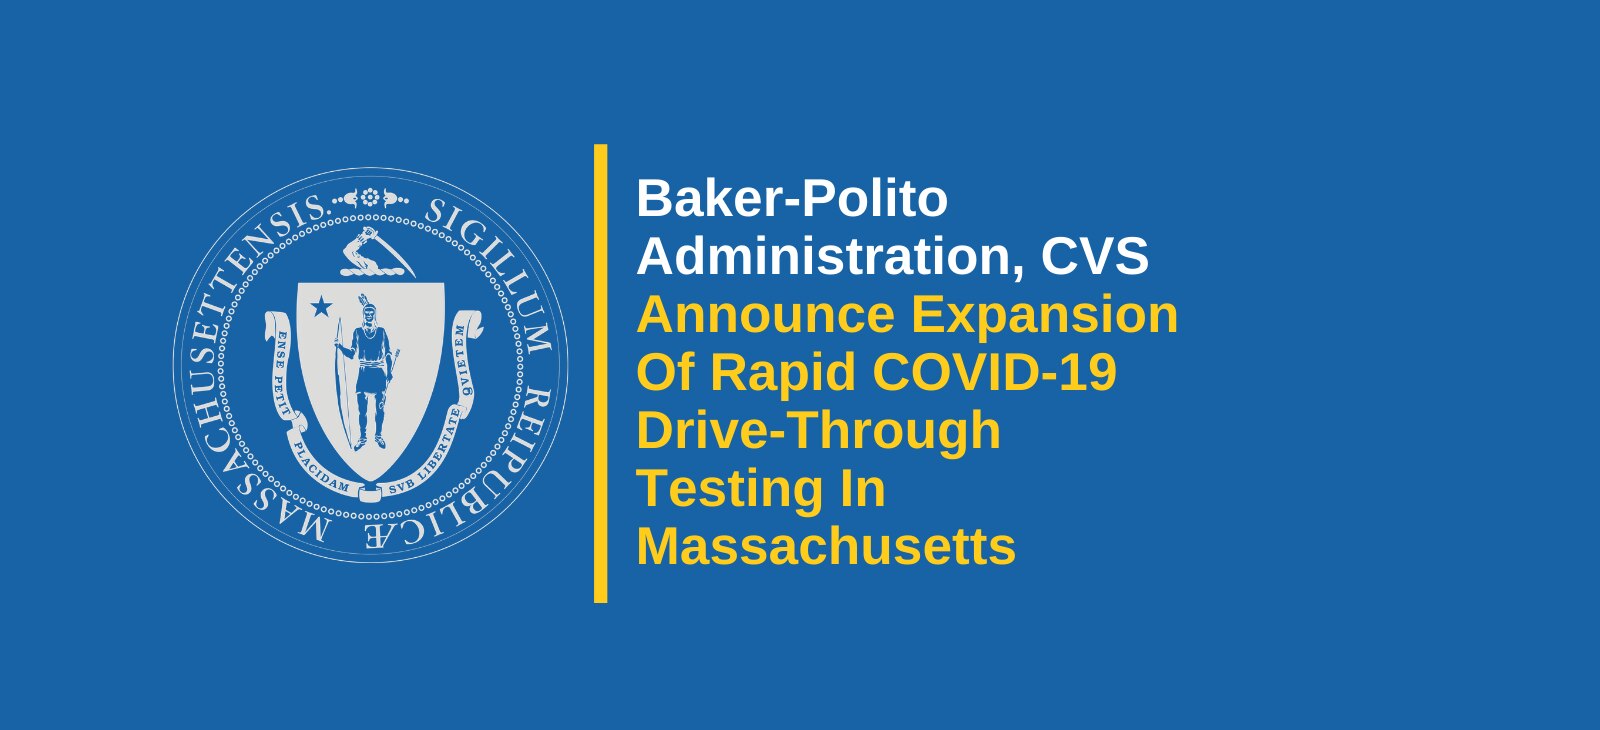 Baker-Polito Administration, CVS Announce Expansion Of Rapid COVID-19 Drive-Through Testing In Massachusetts